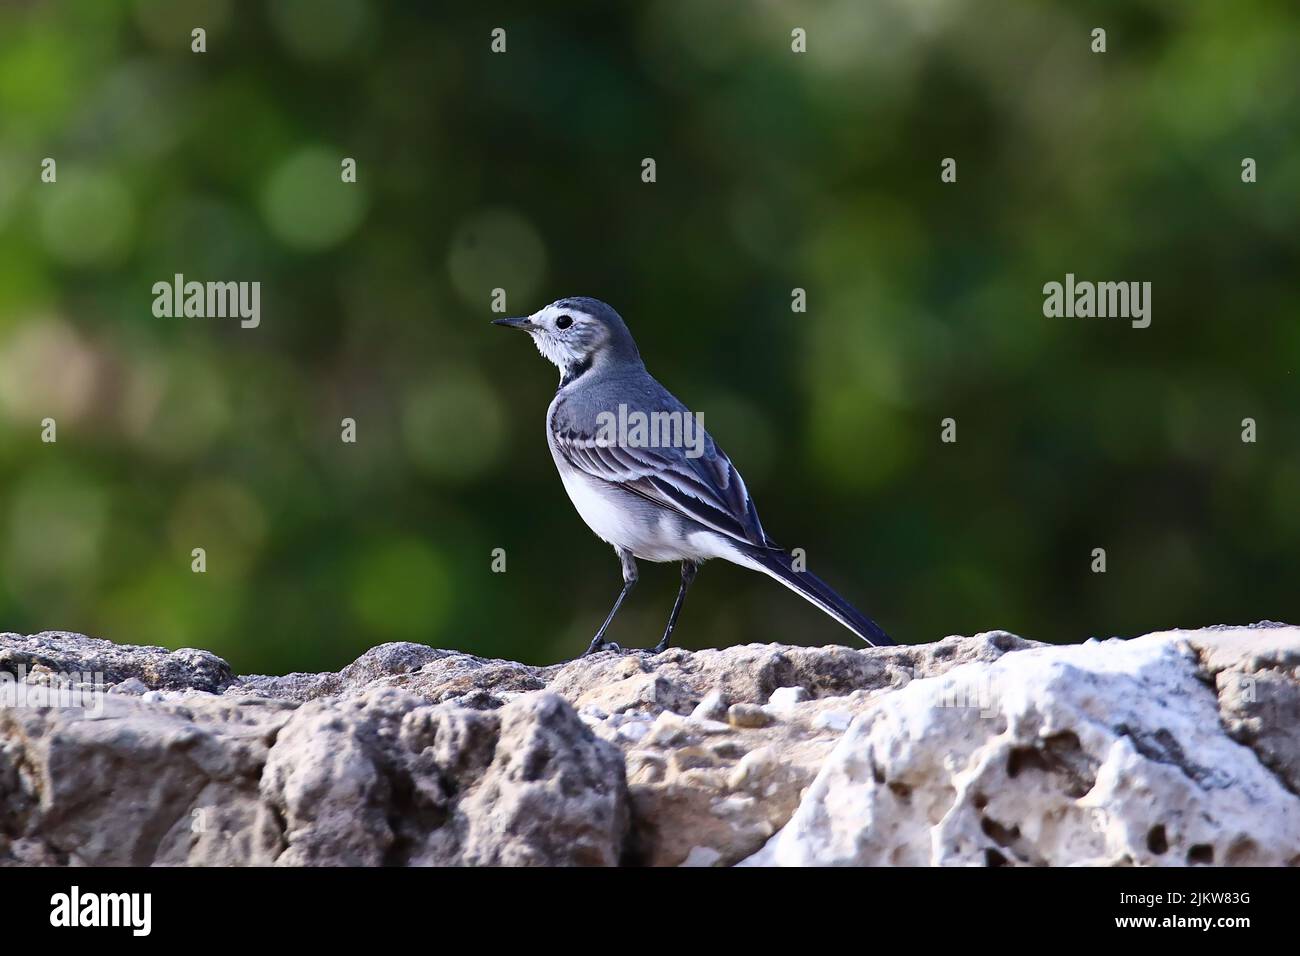 A lone wagtail on a rock surface against a blurred background Stock Photo